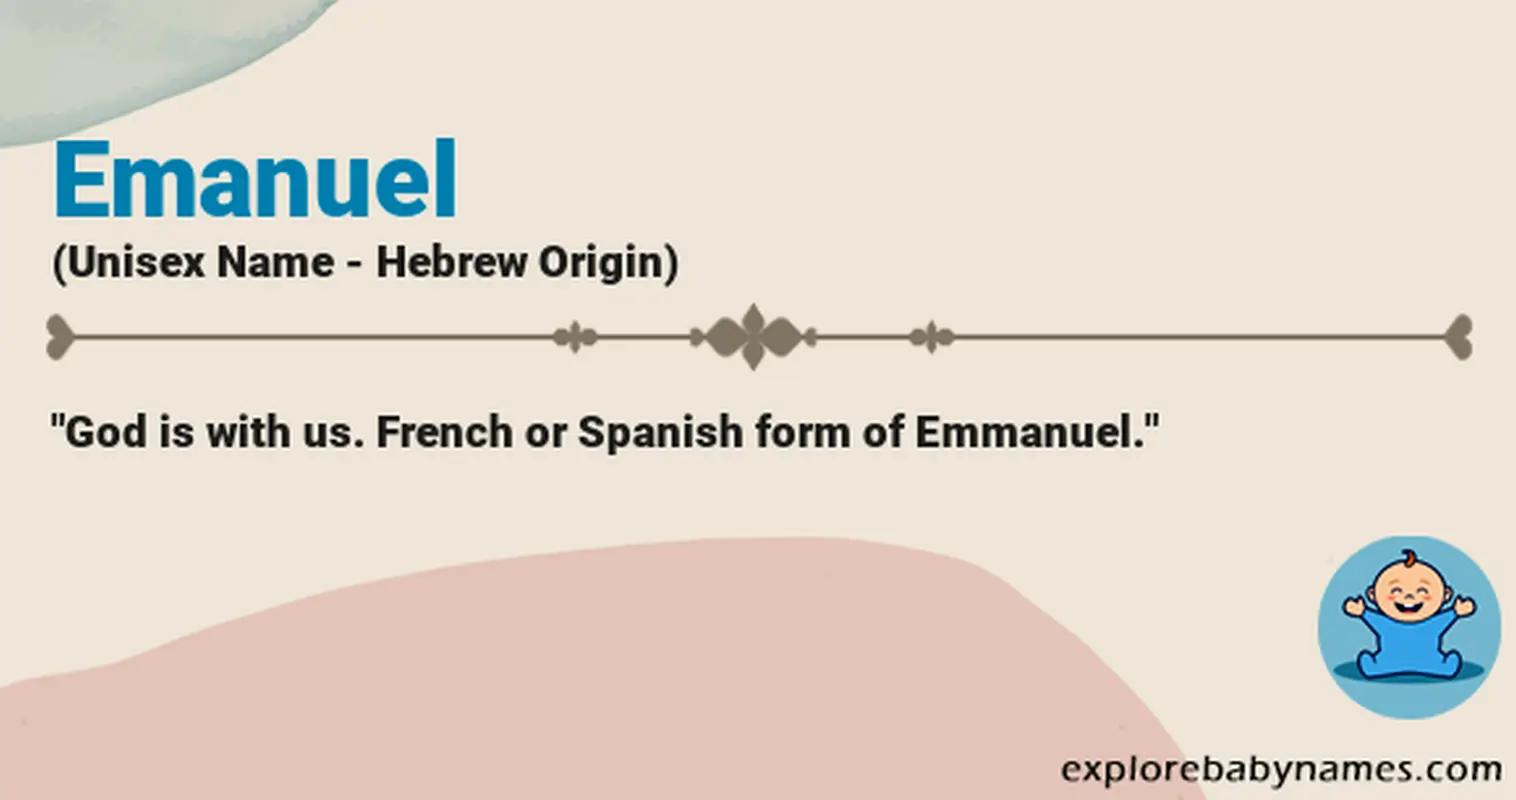 Meaning of Emanuel